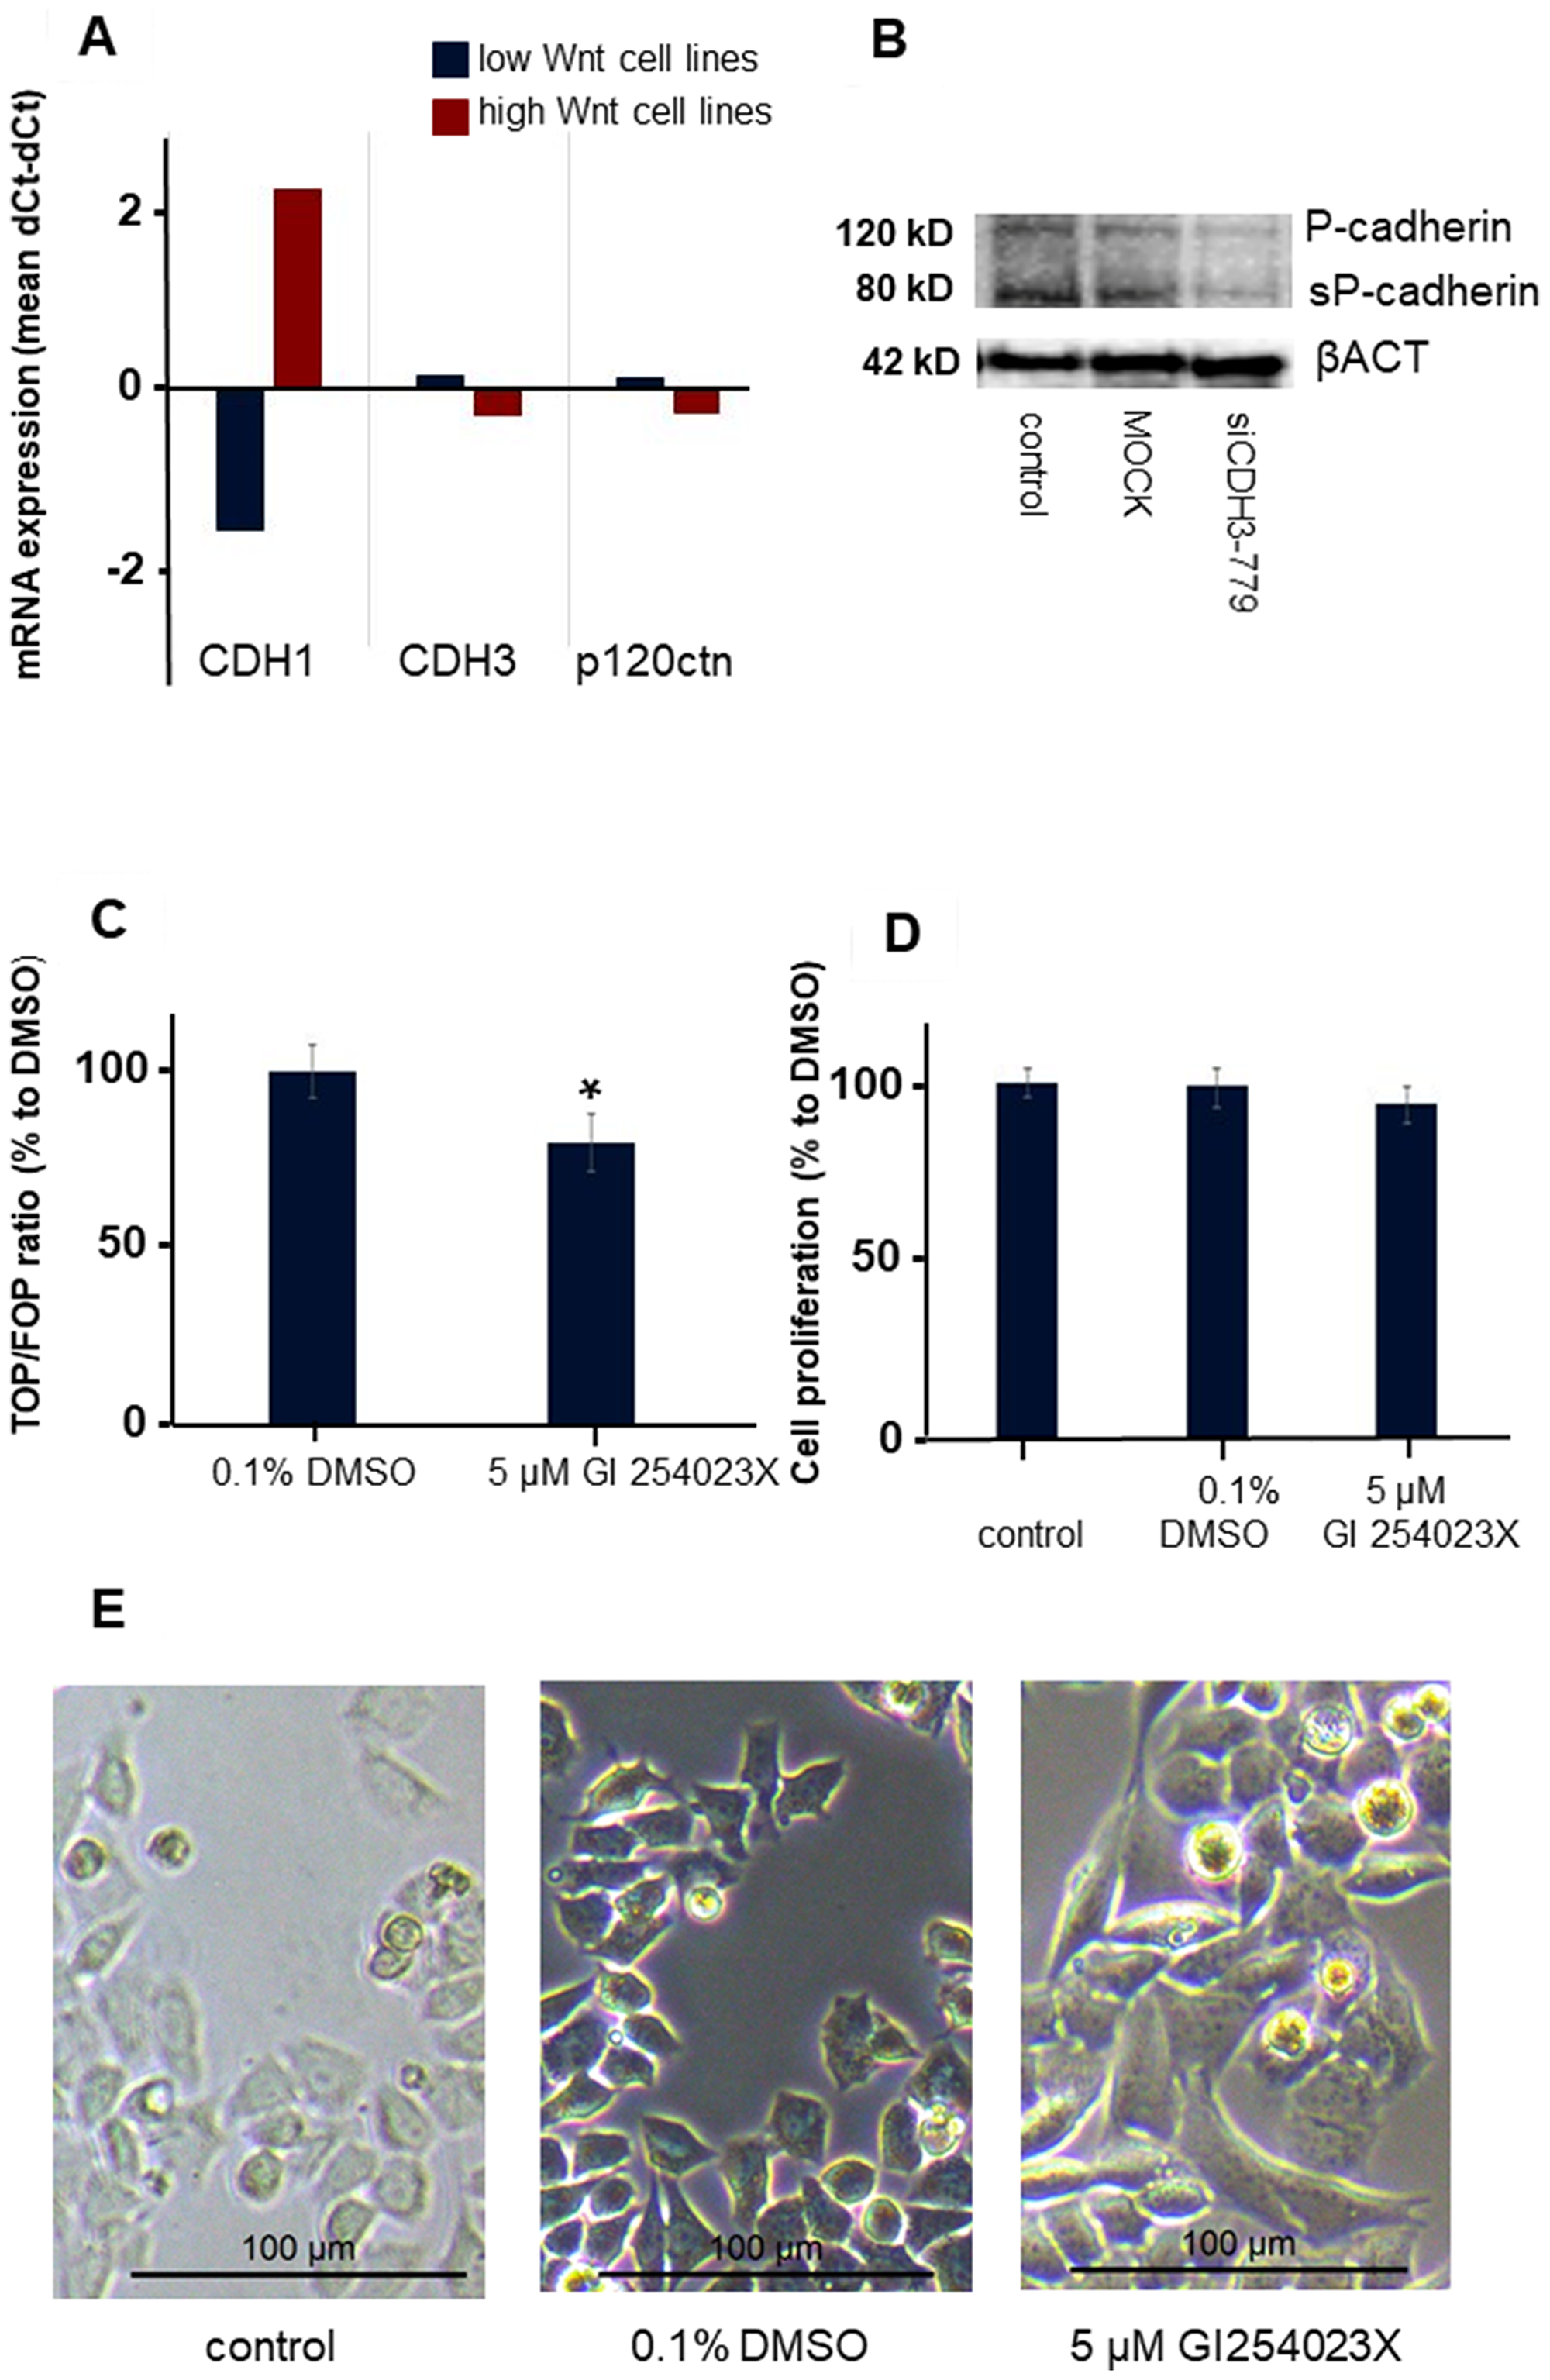 The effect of ADAM10 inhibitor GI 254023X in the CMT-U27 canine mammary tumor cell line.